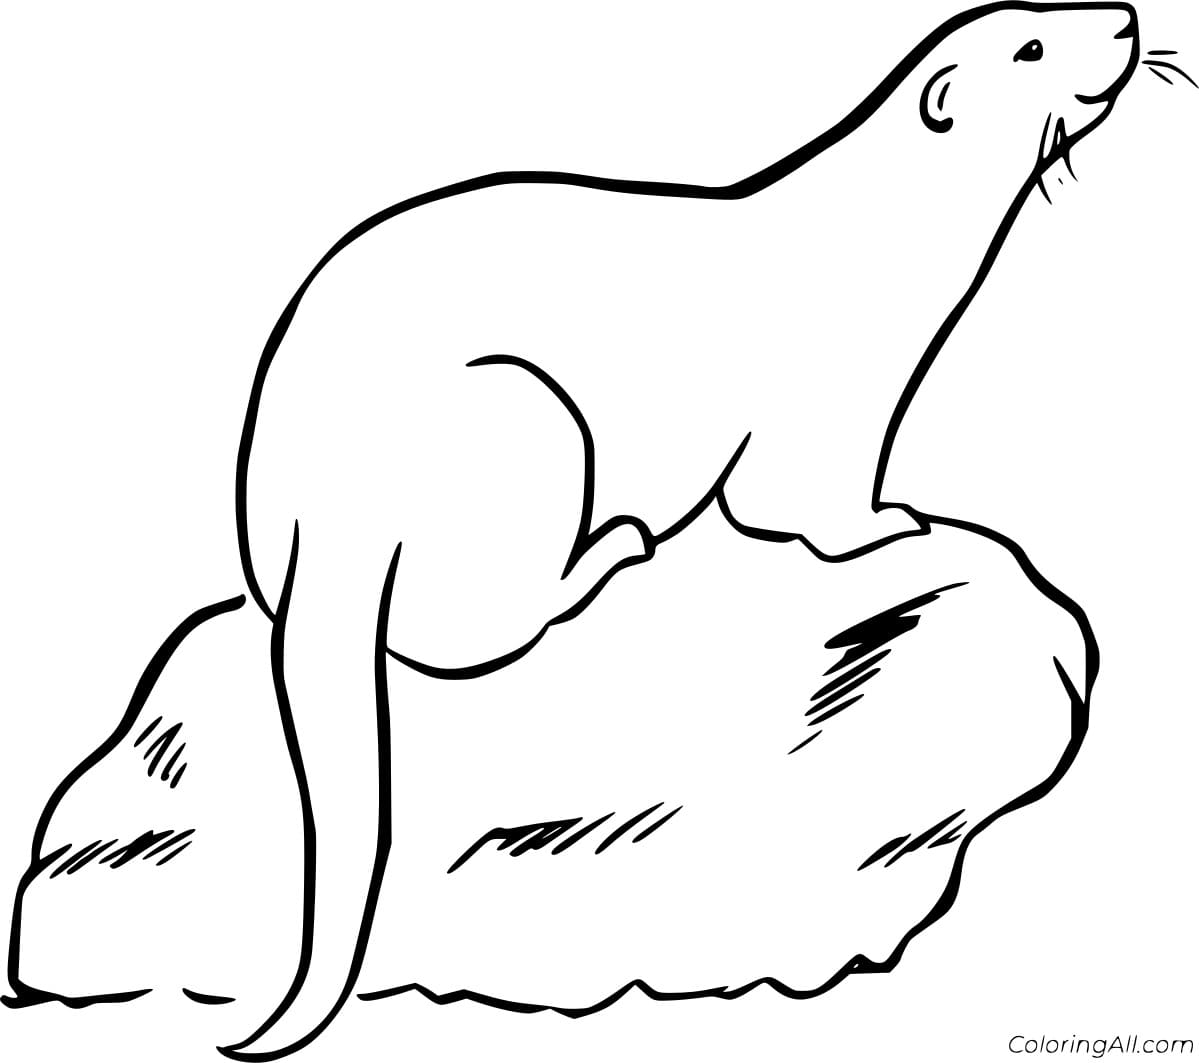 North American River Otter Free Printable Coloring Page